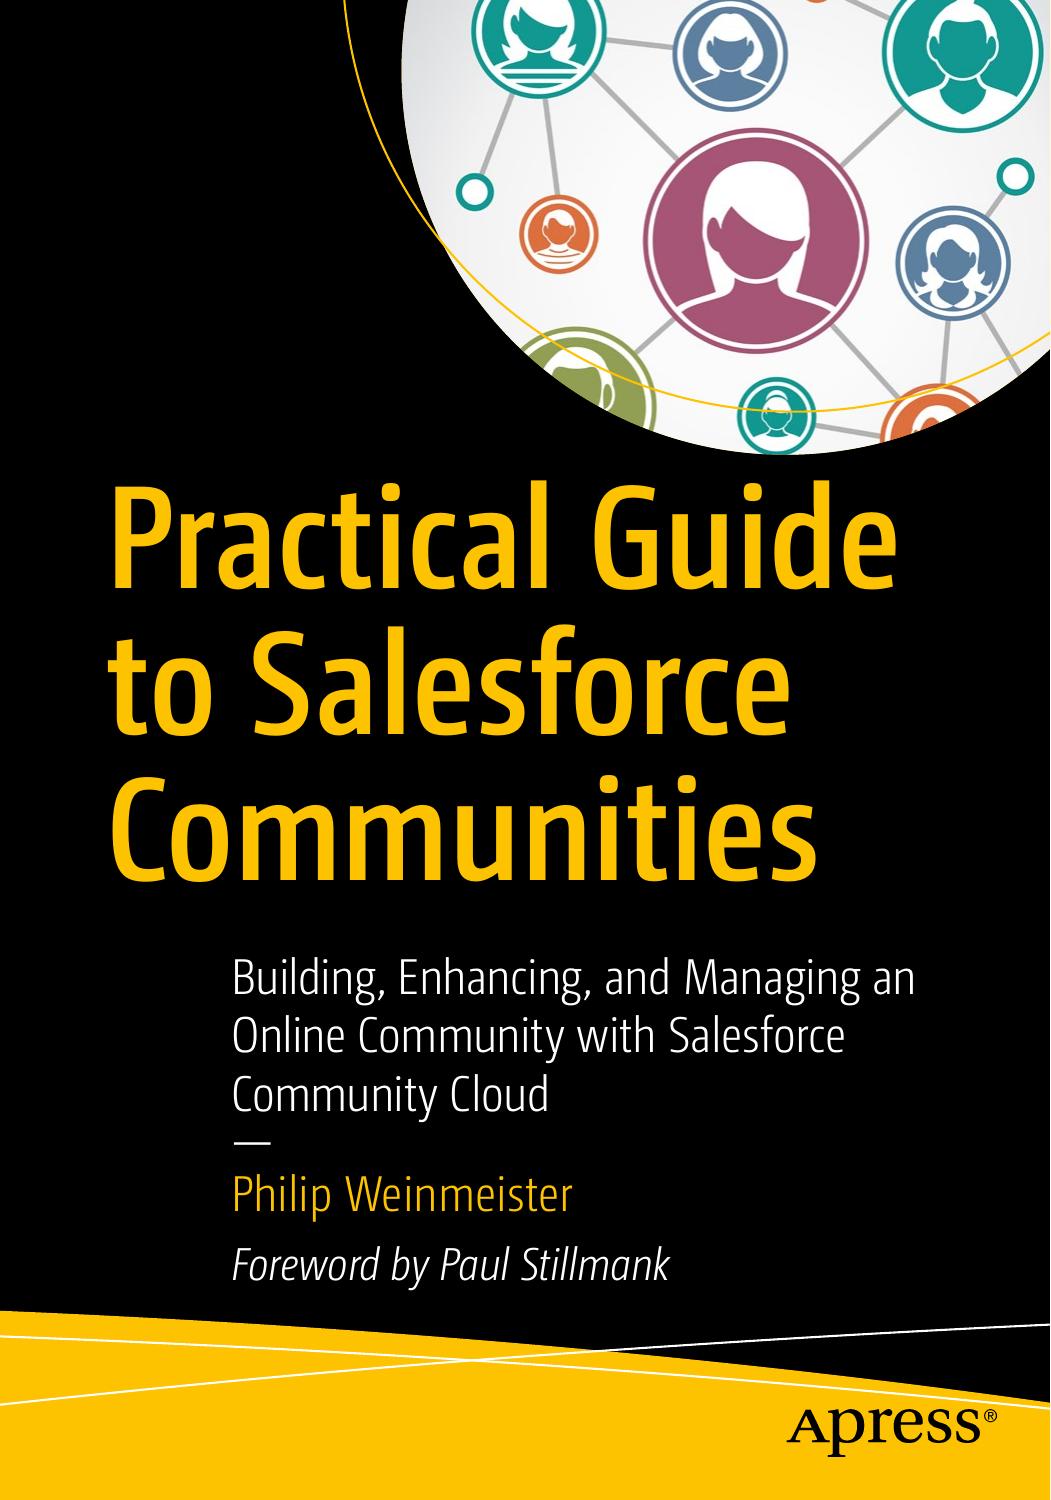 Practical Guide to Salesforce Communities 2018